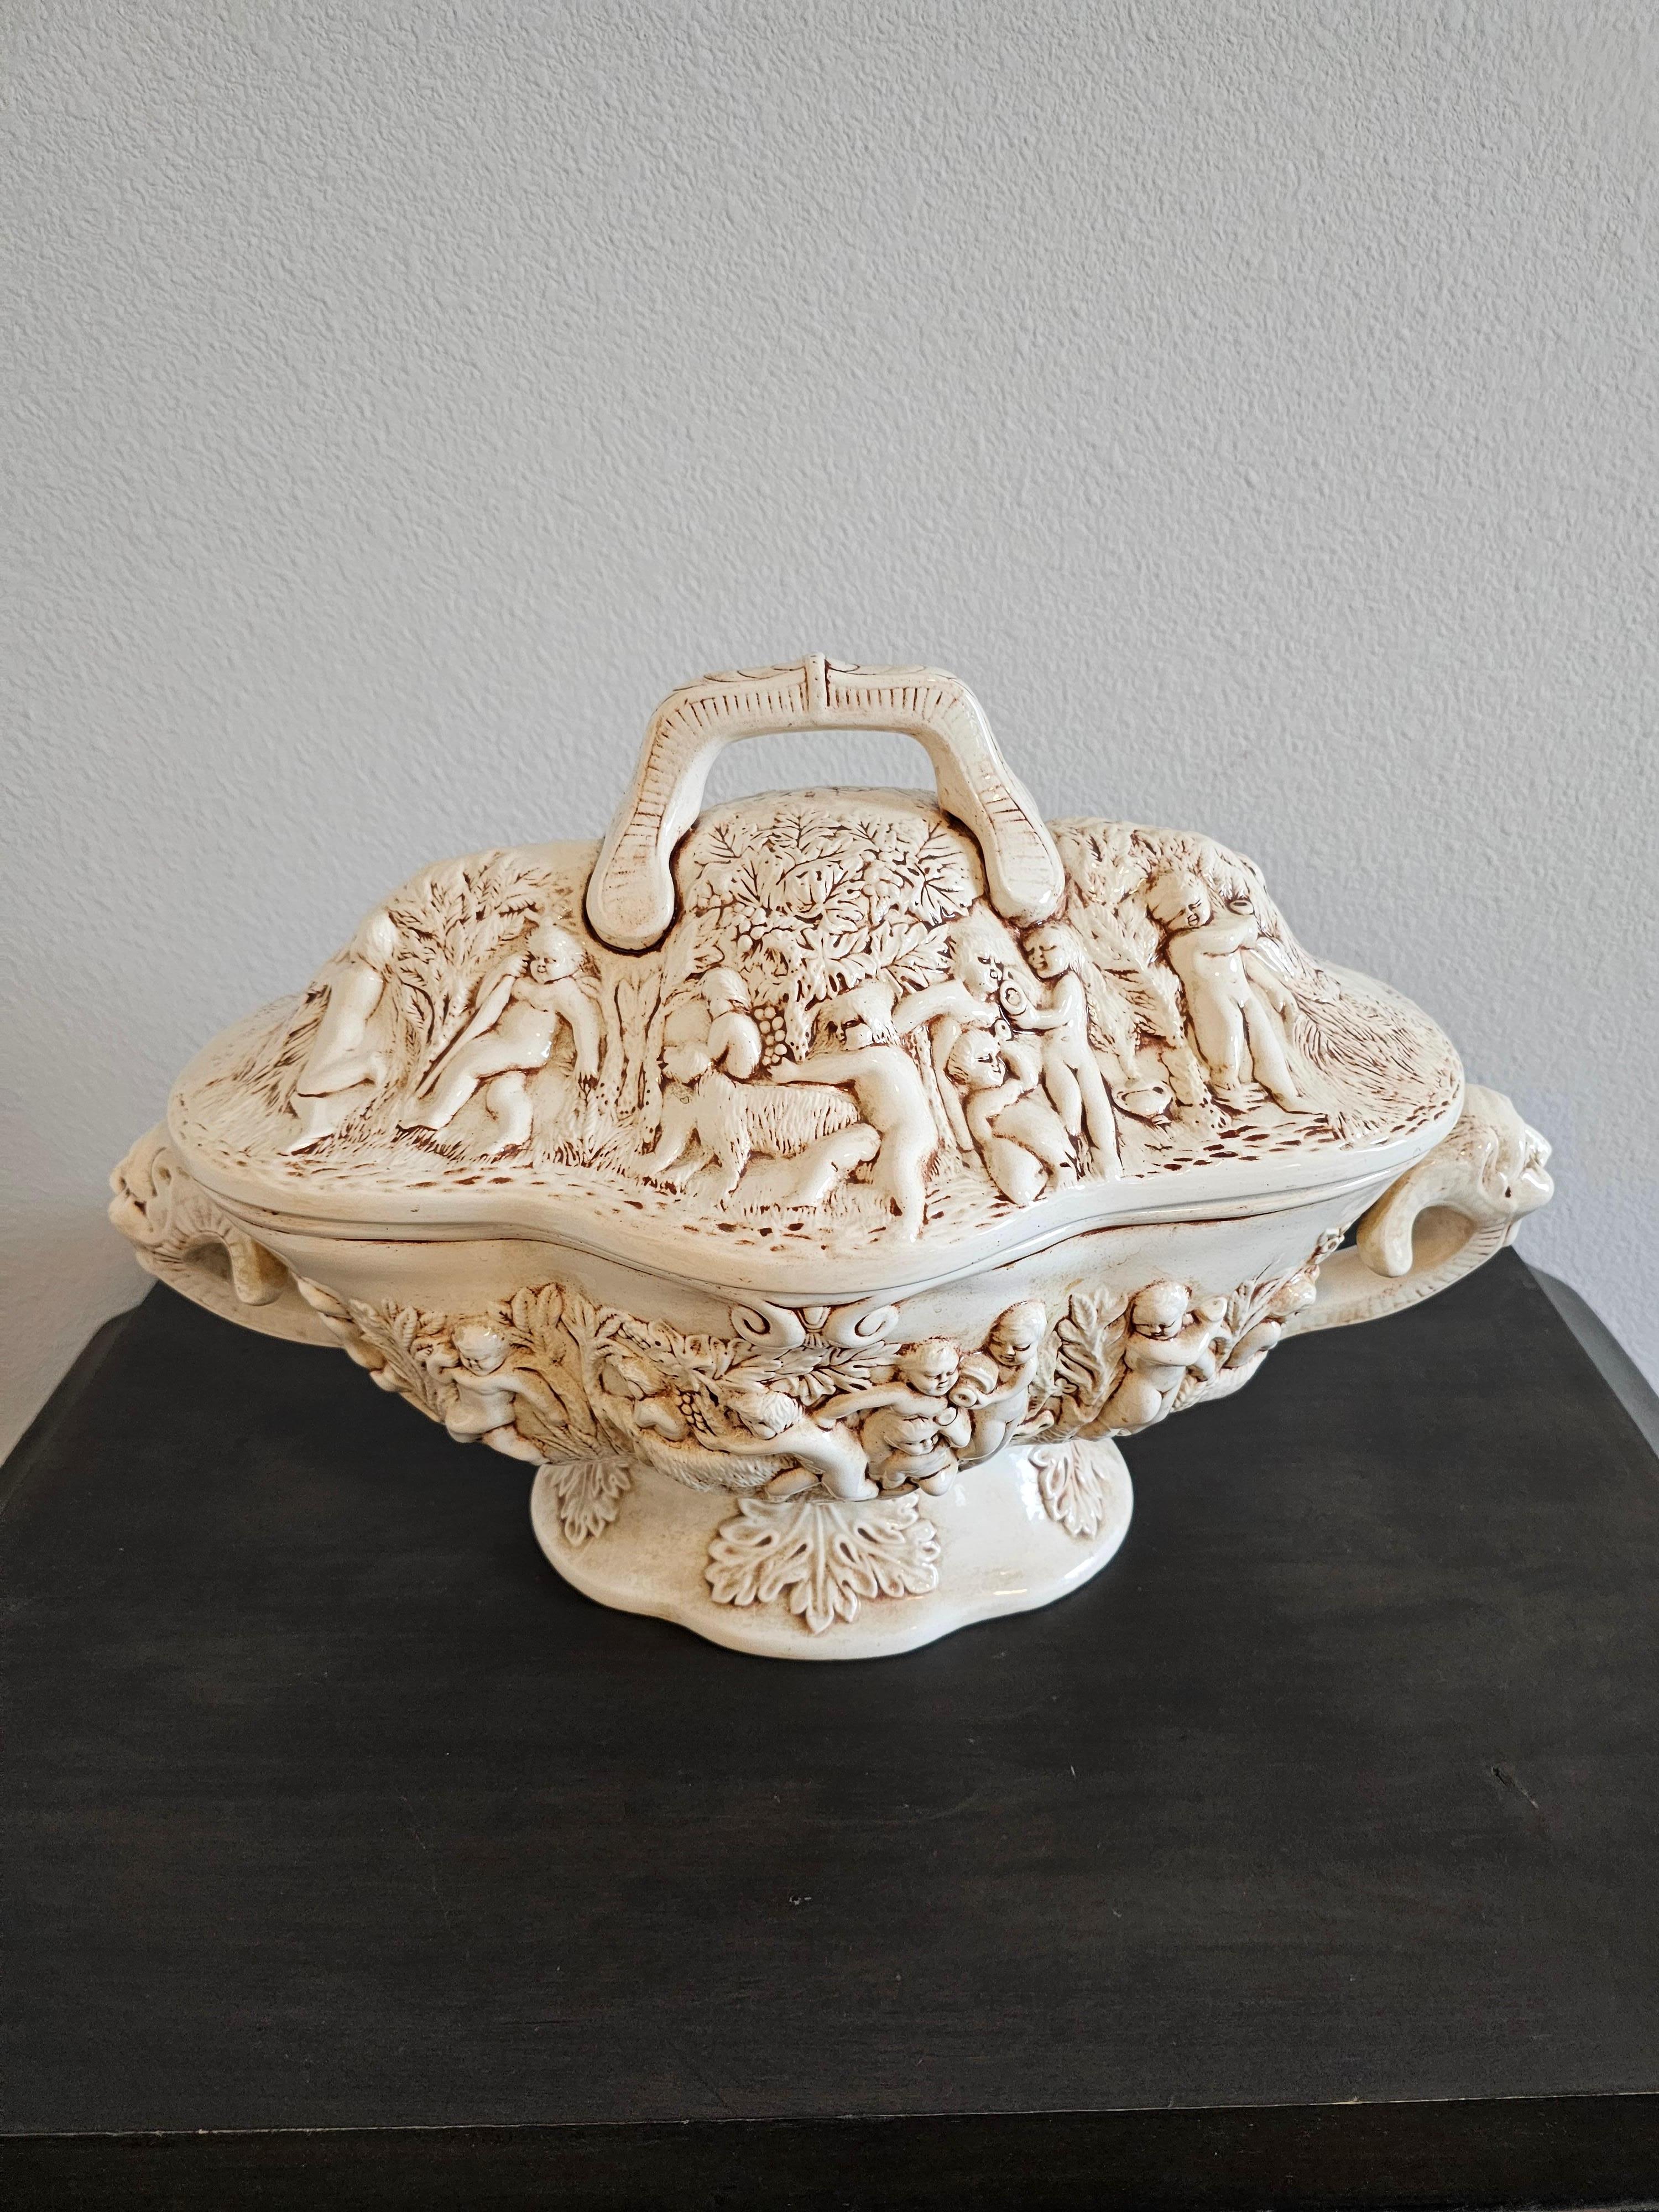 Vintage Italian Capodimonte Porcelain Covered Serving Dish Large Soup Tureen For Sale 8